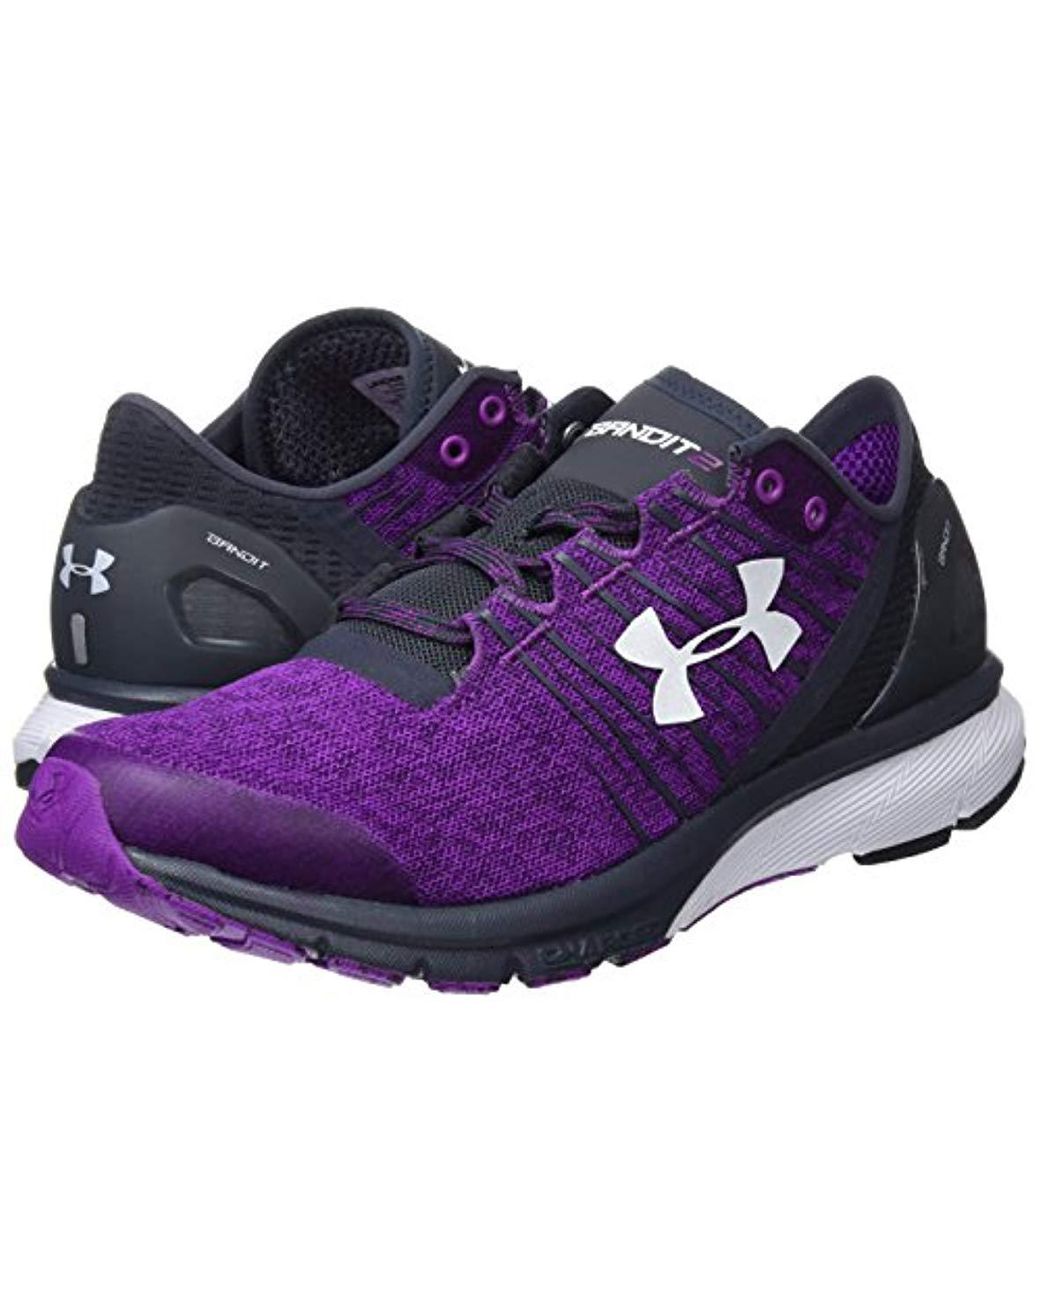 Under Armour Rubber Charged Bandit 2 Cross-country Running Shoe in Purple |  Lyst